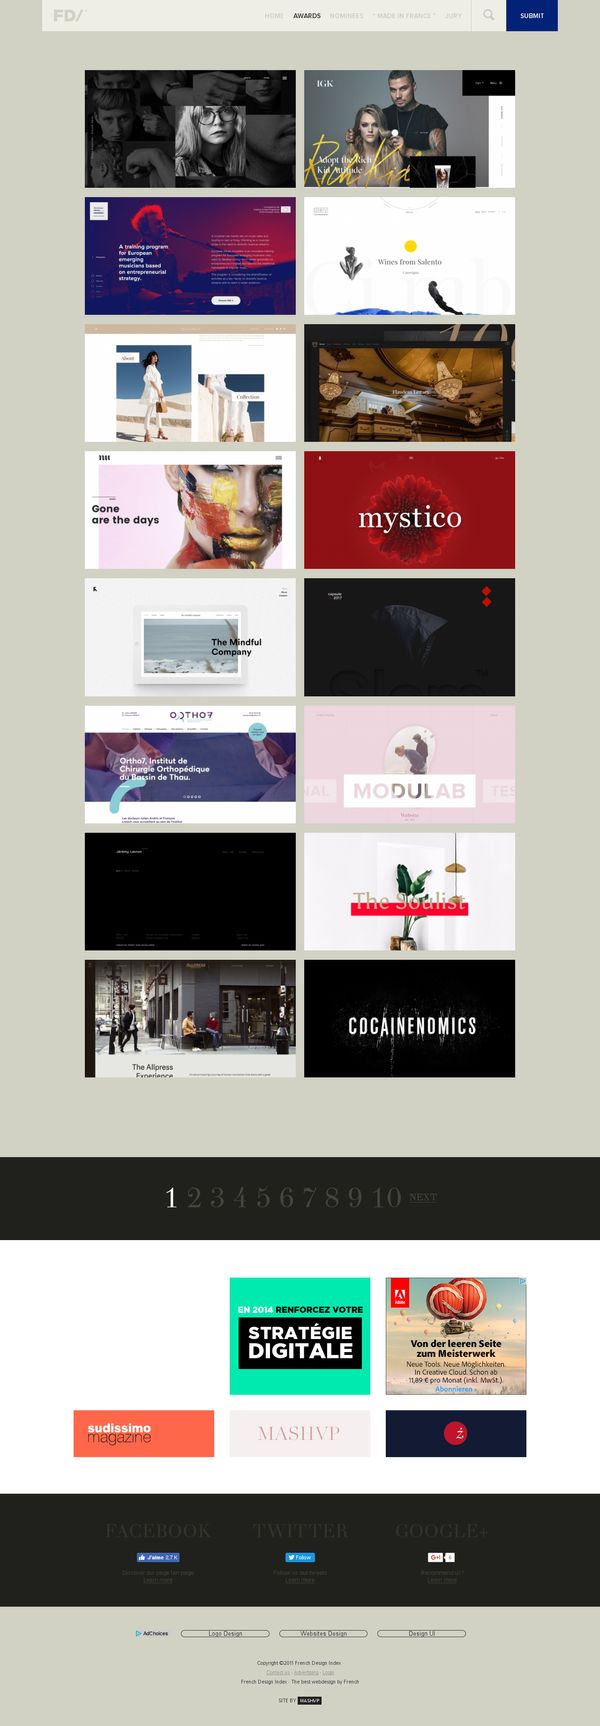 webdesign, inspiration, graphic design, showcase... The best webdesign by French